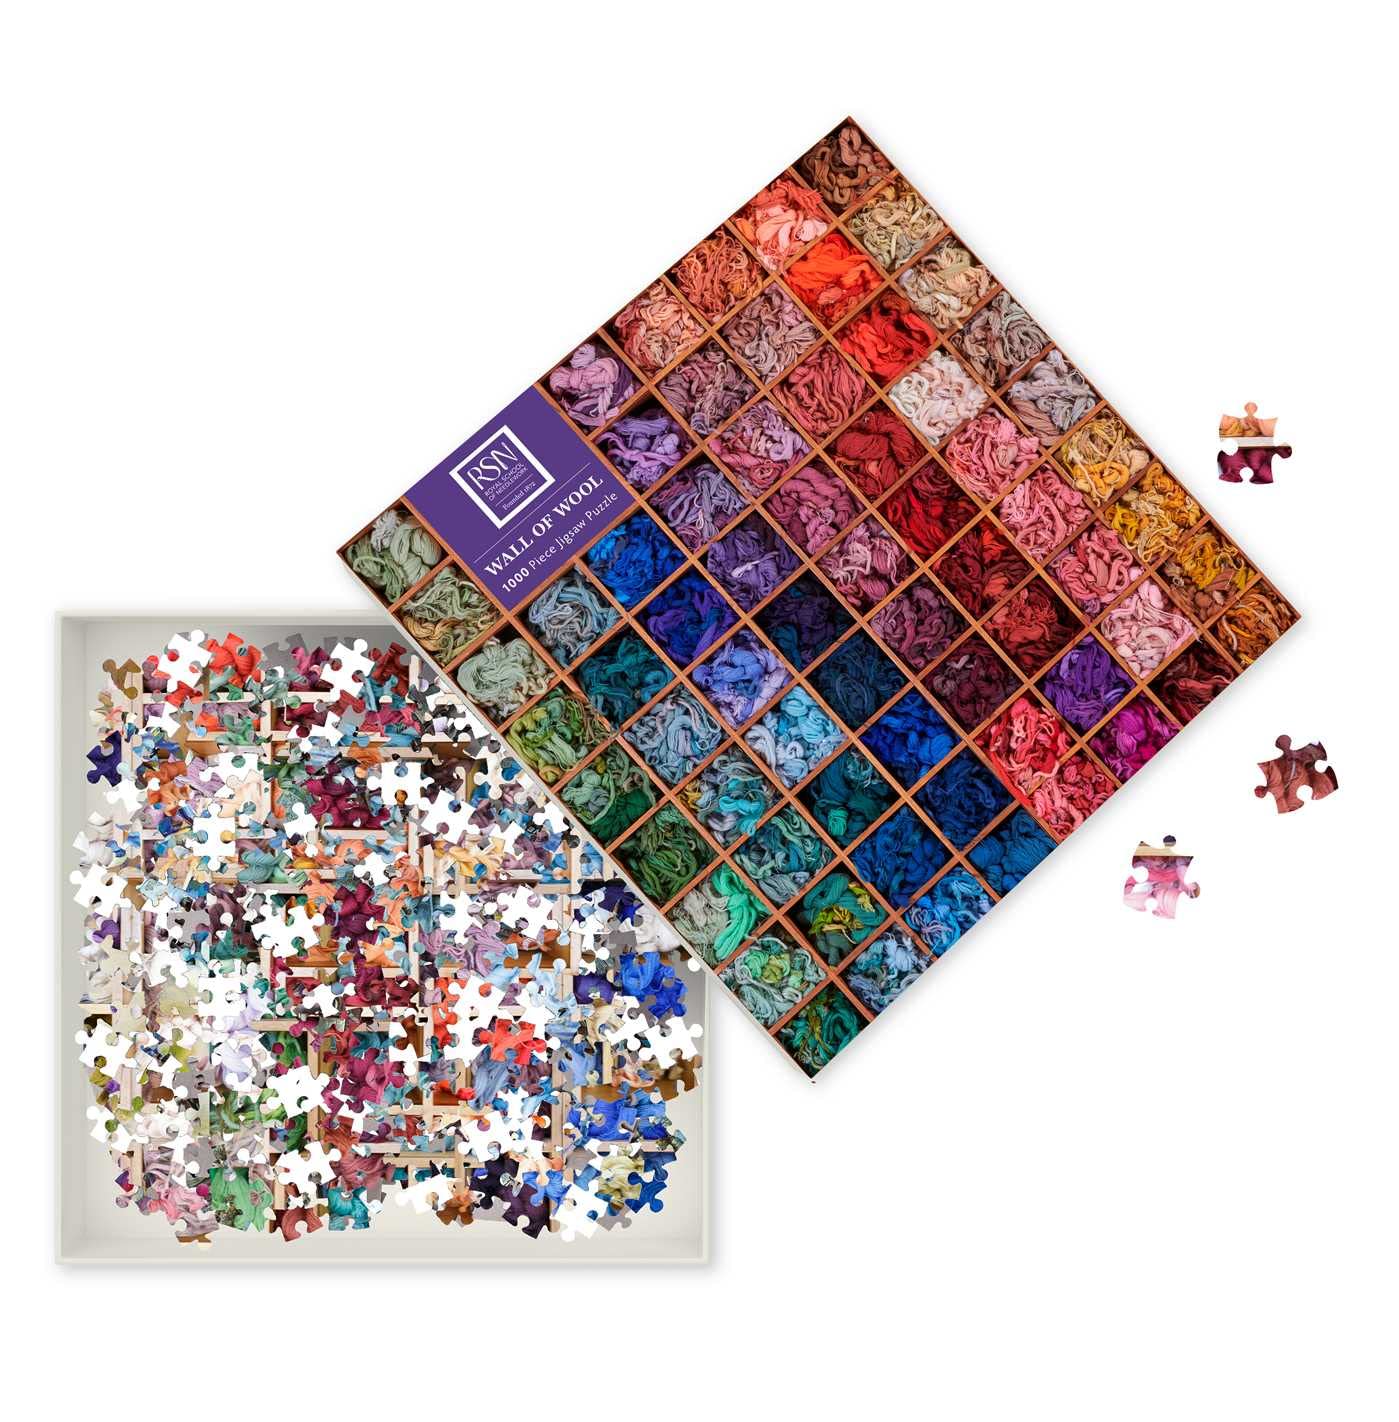 Wall of Wool Jigsaw Puzzle pieces